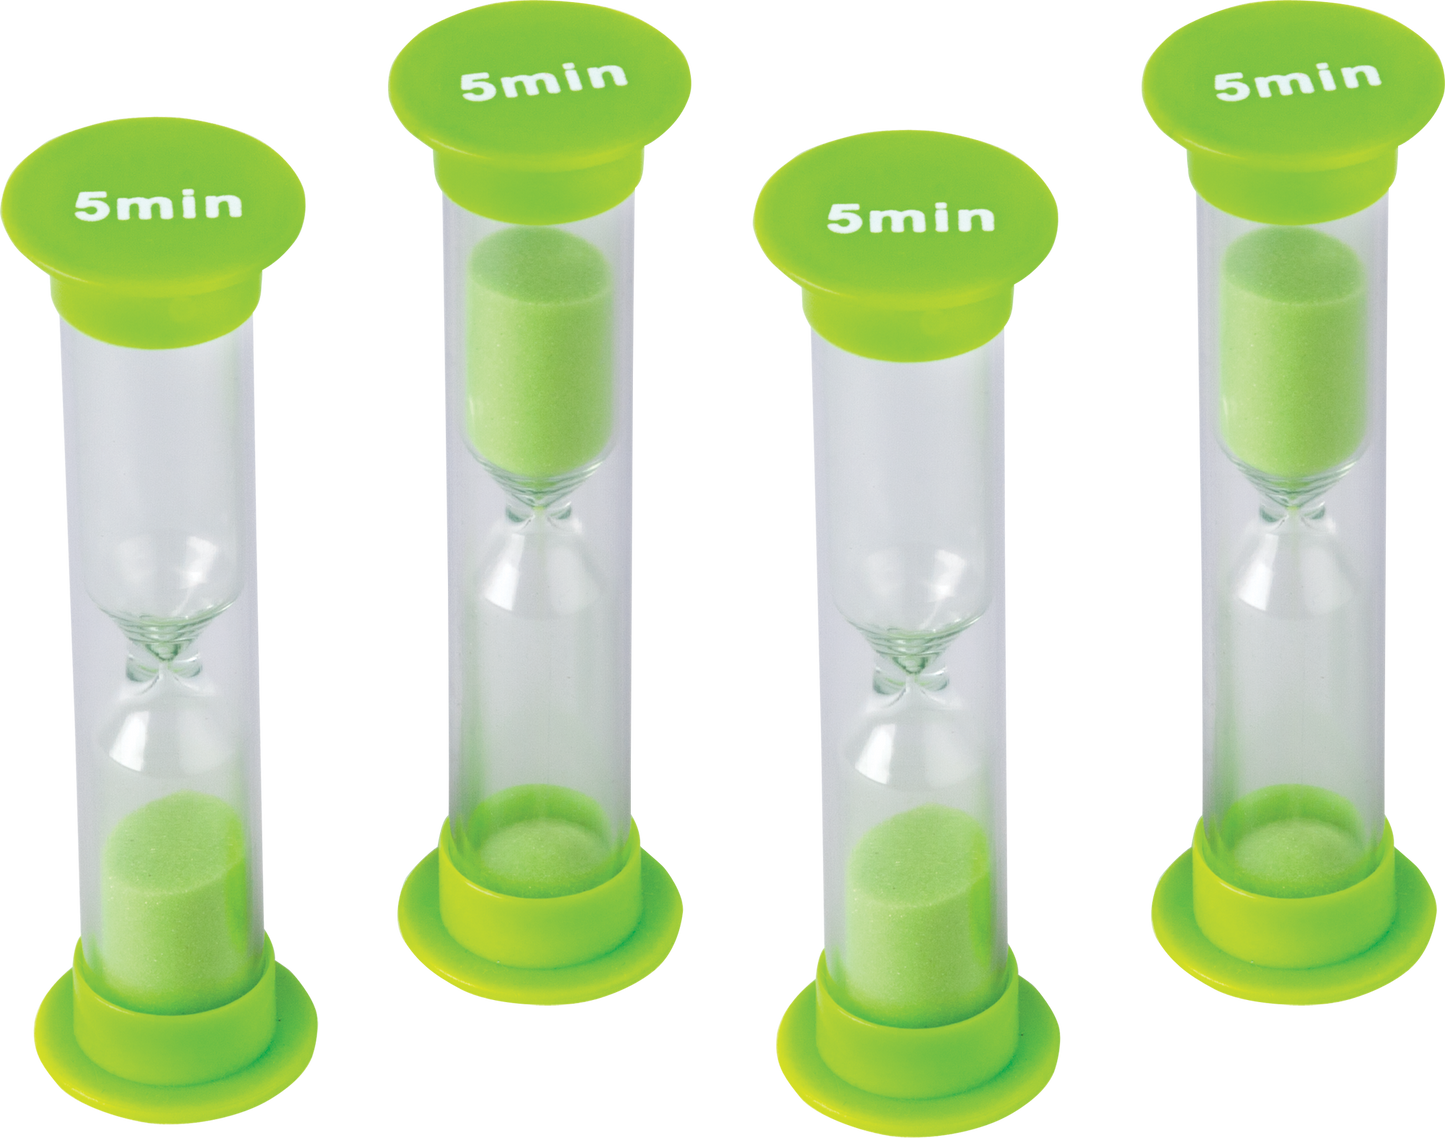 5 Minute Sand Timers - Small